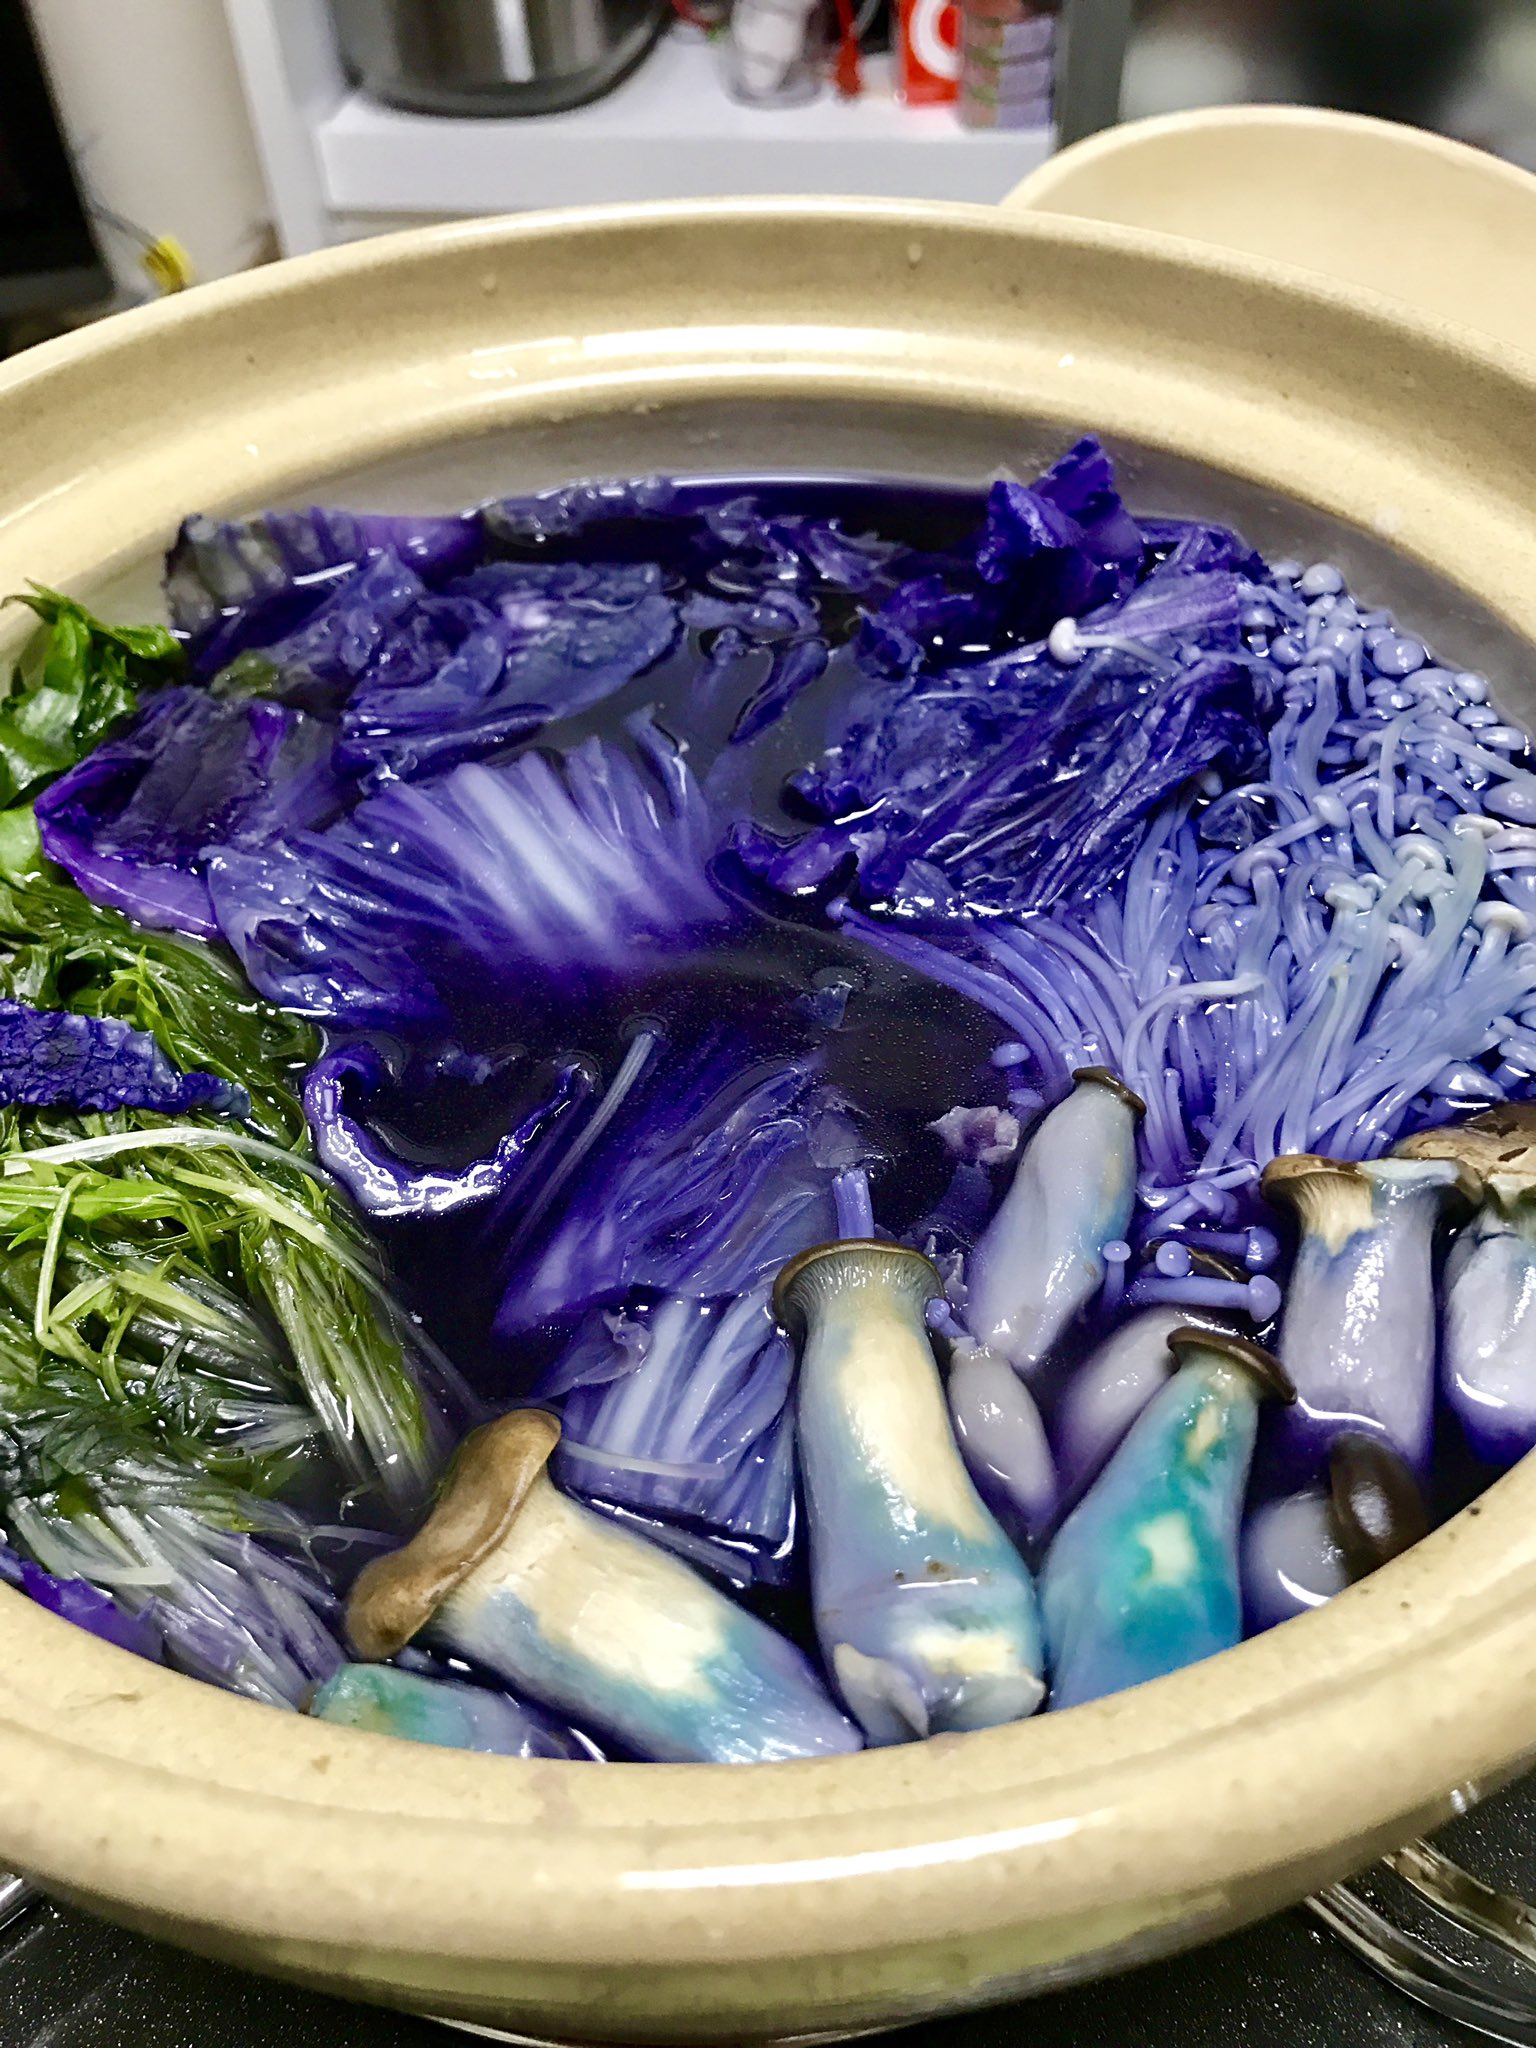 Should I put it in the purple cabbage nabe?